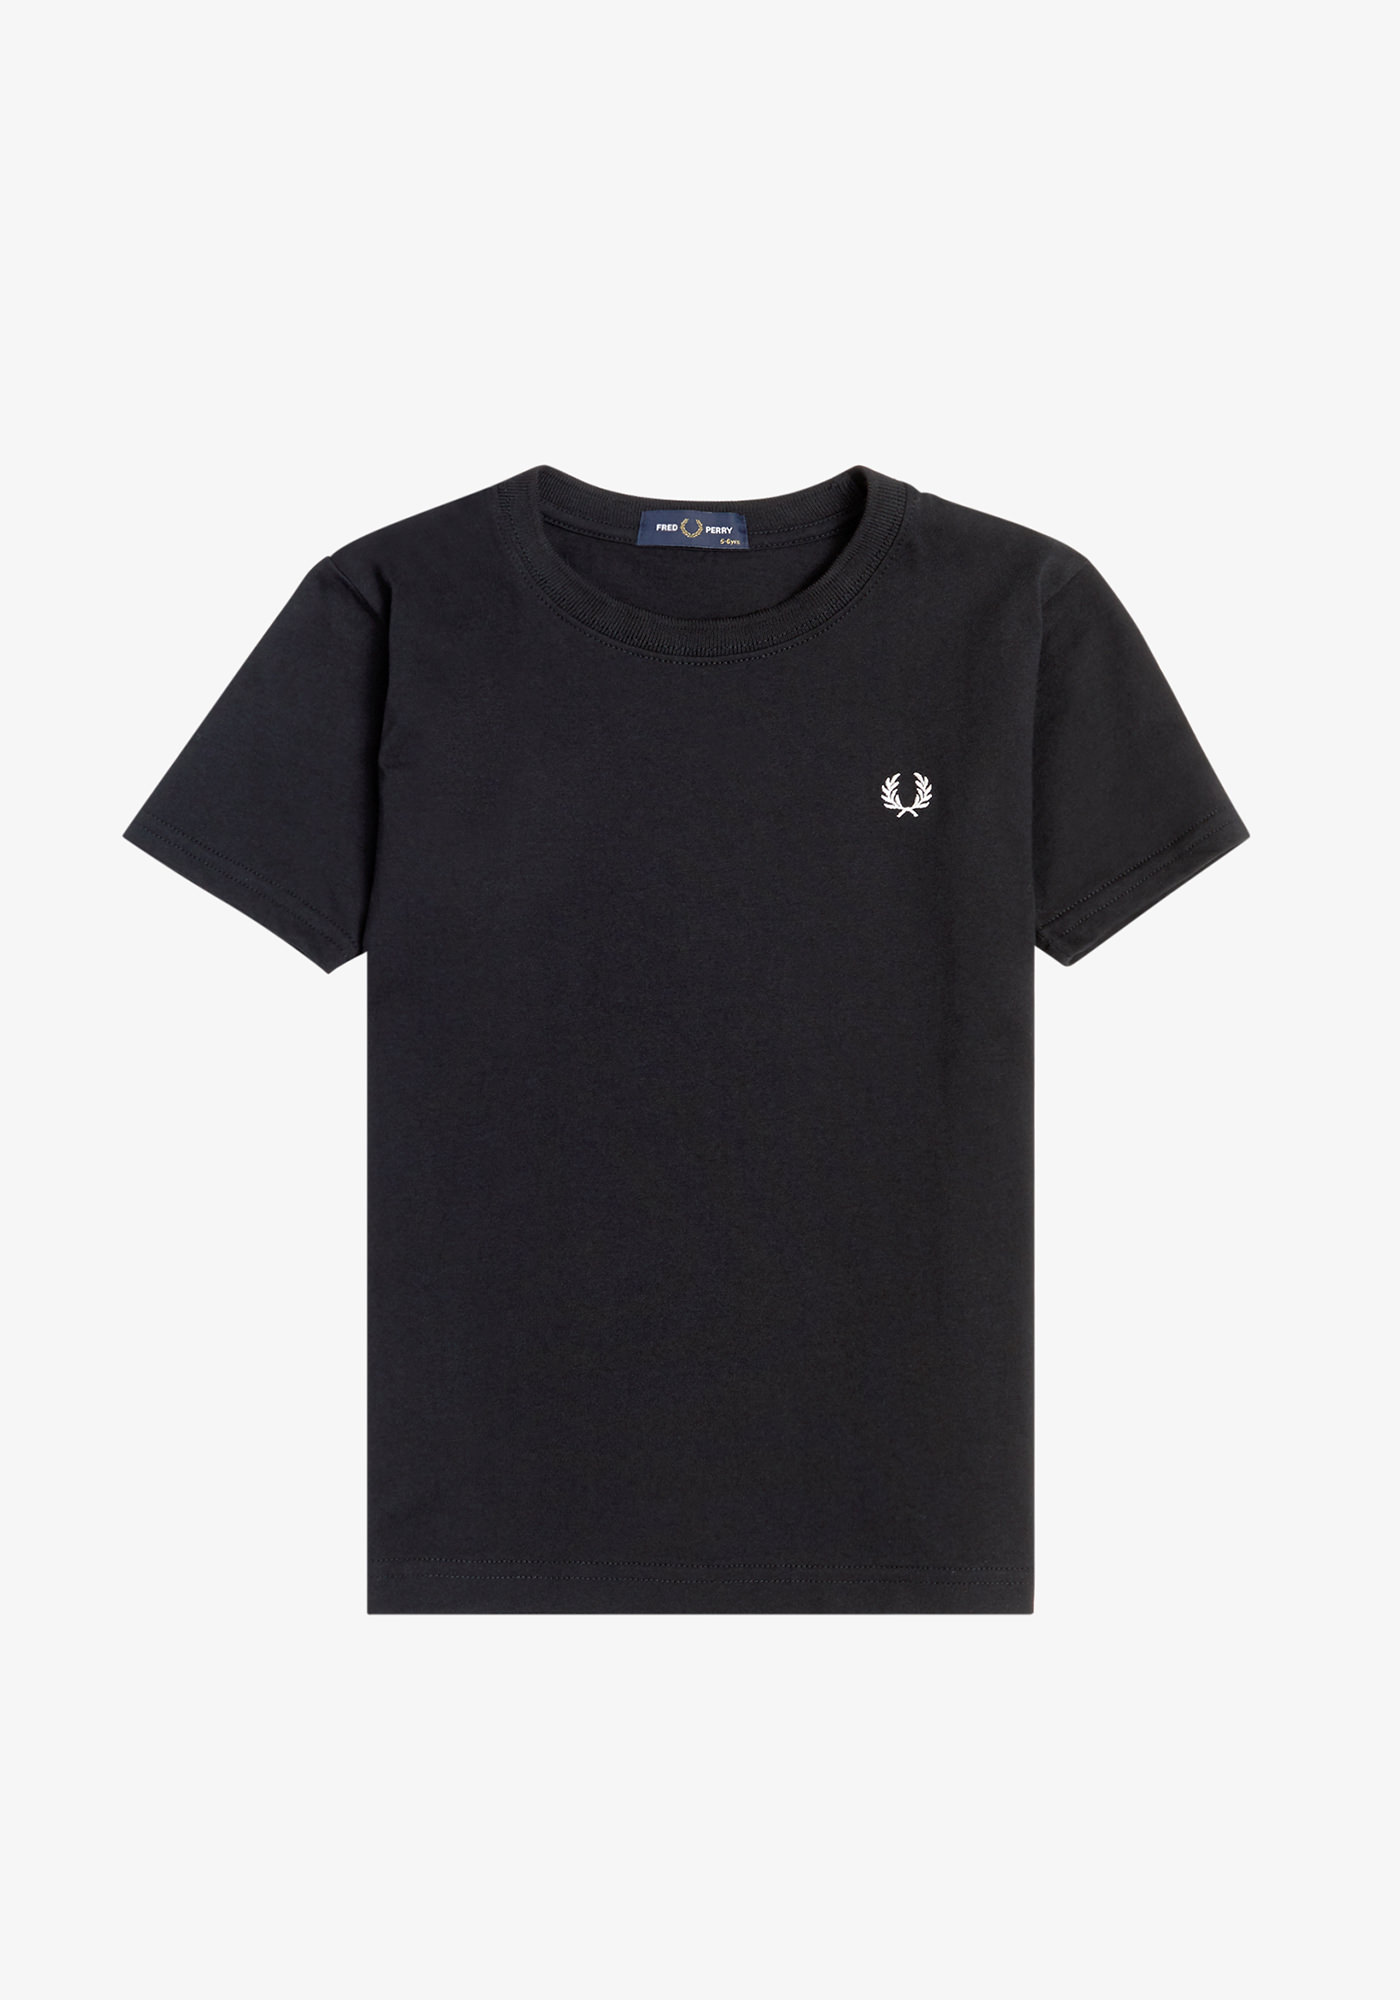 Tシャツ キッズ フレッドペリー カットソー FRED PERRY KIDS CREW NECK T...